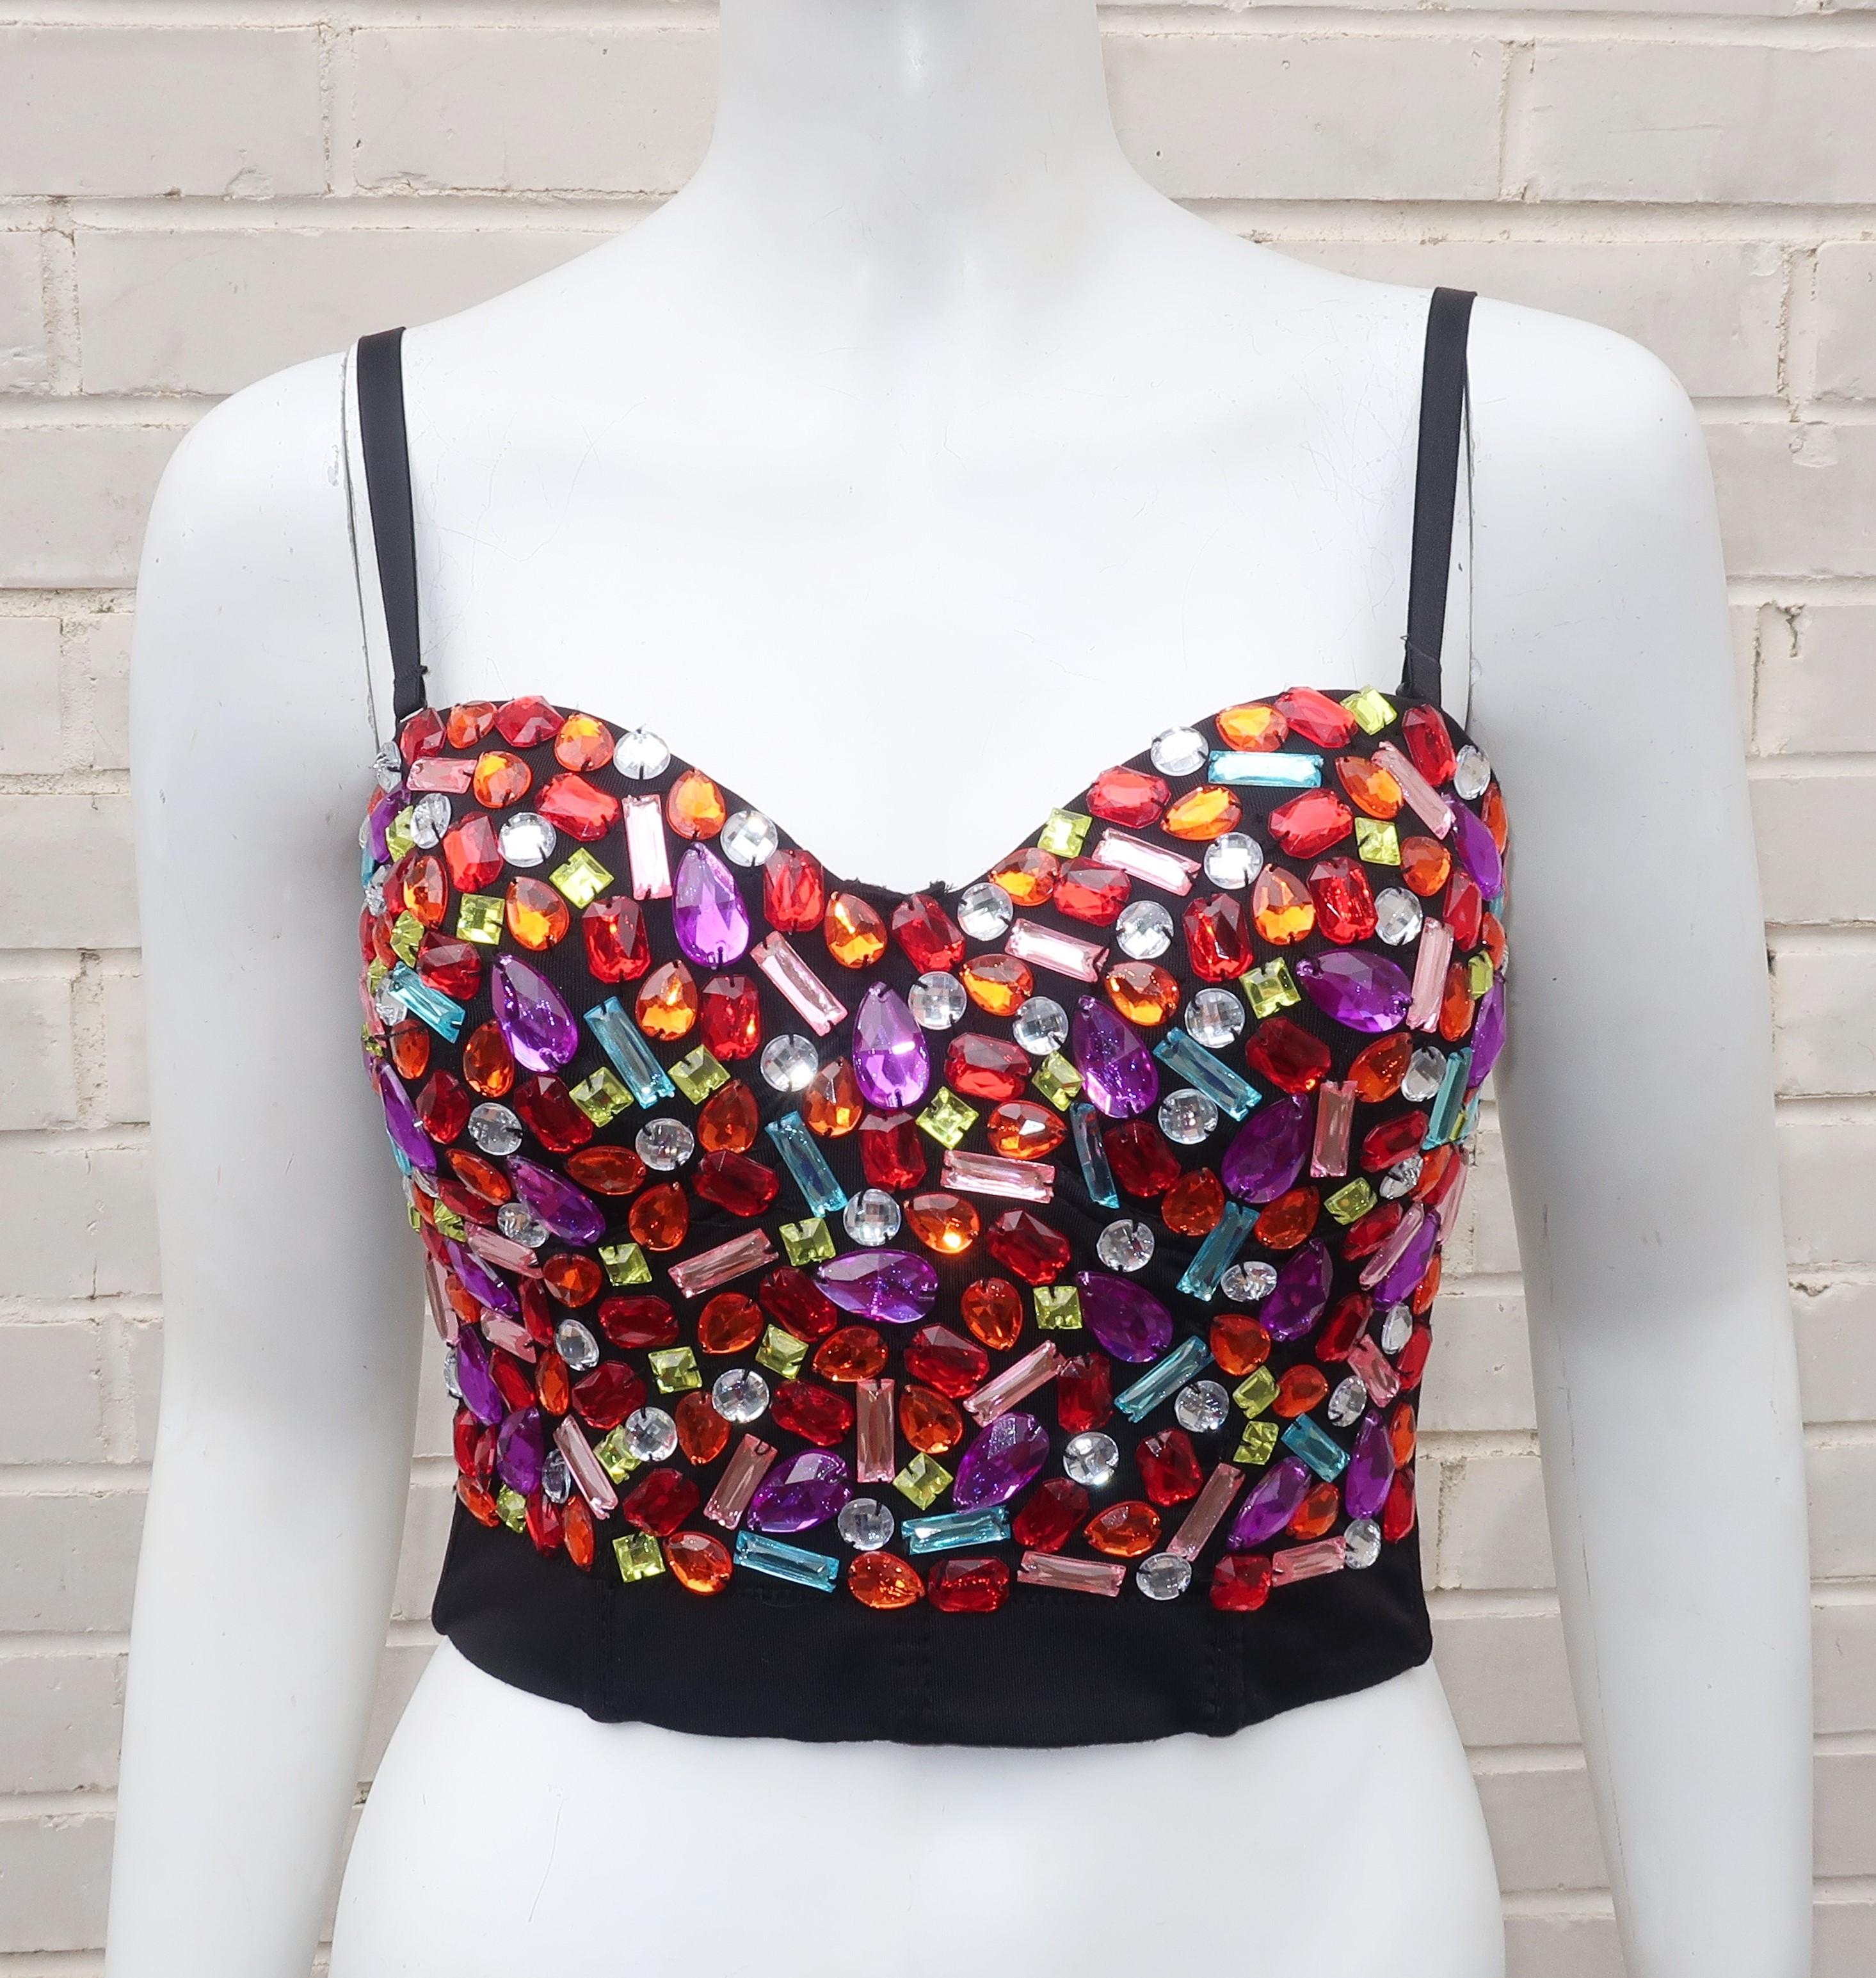 This jeweled black bustier top is just for fun and though contemporary is a flashback to 1980's fashions.  The stretchy black bra style design has adjustable and removable straps with a row of five hook and eye closures offering four sizing